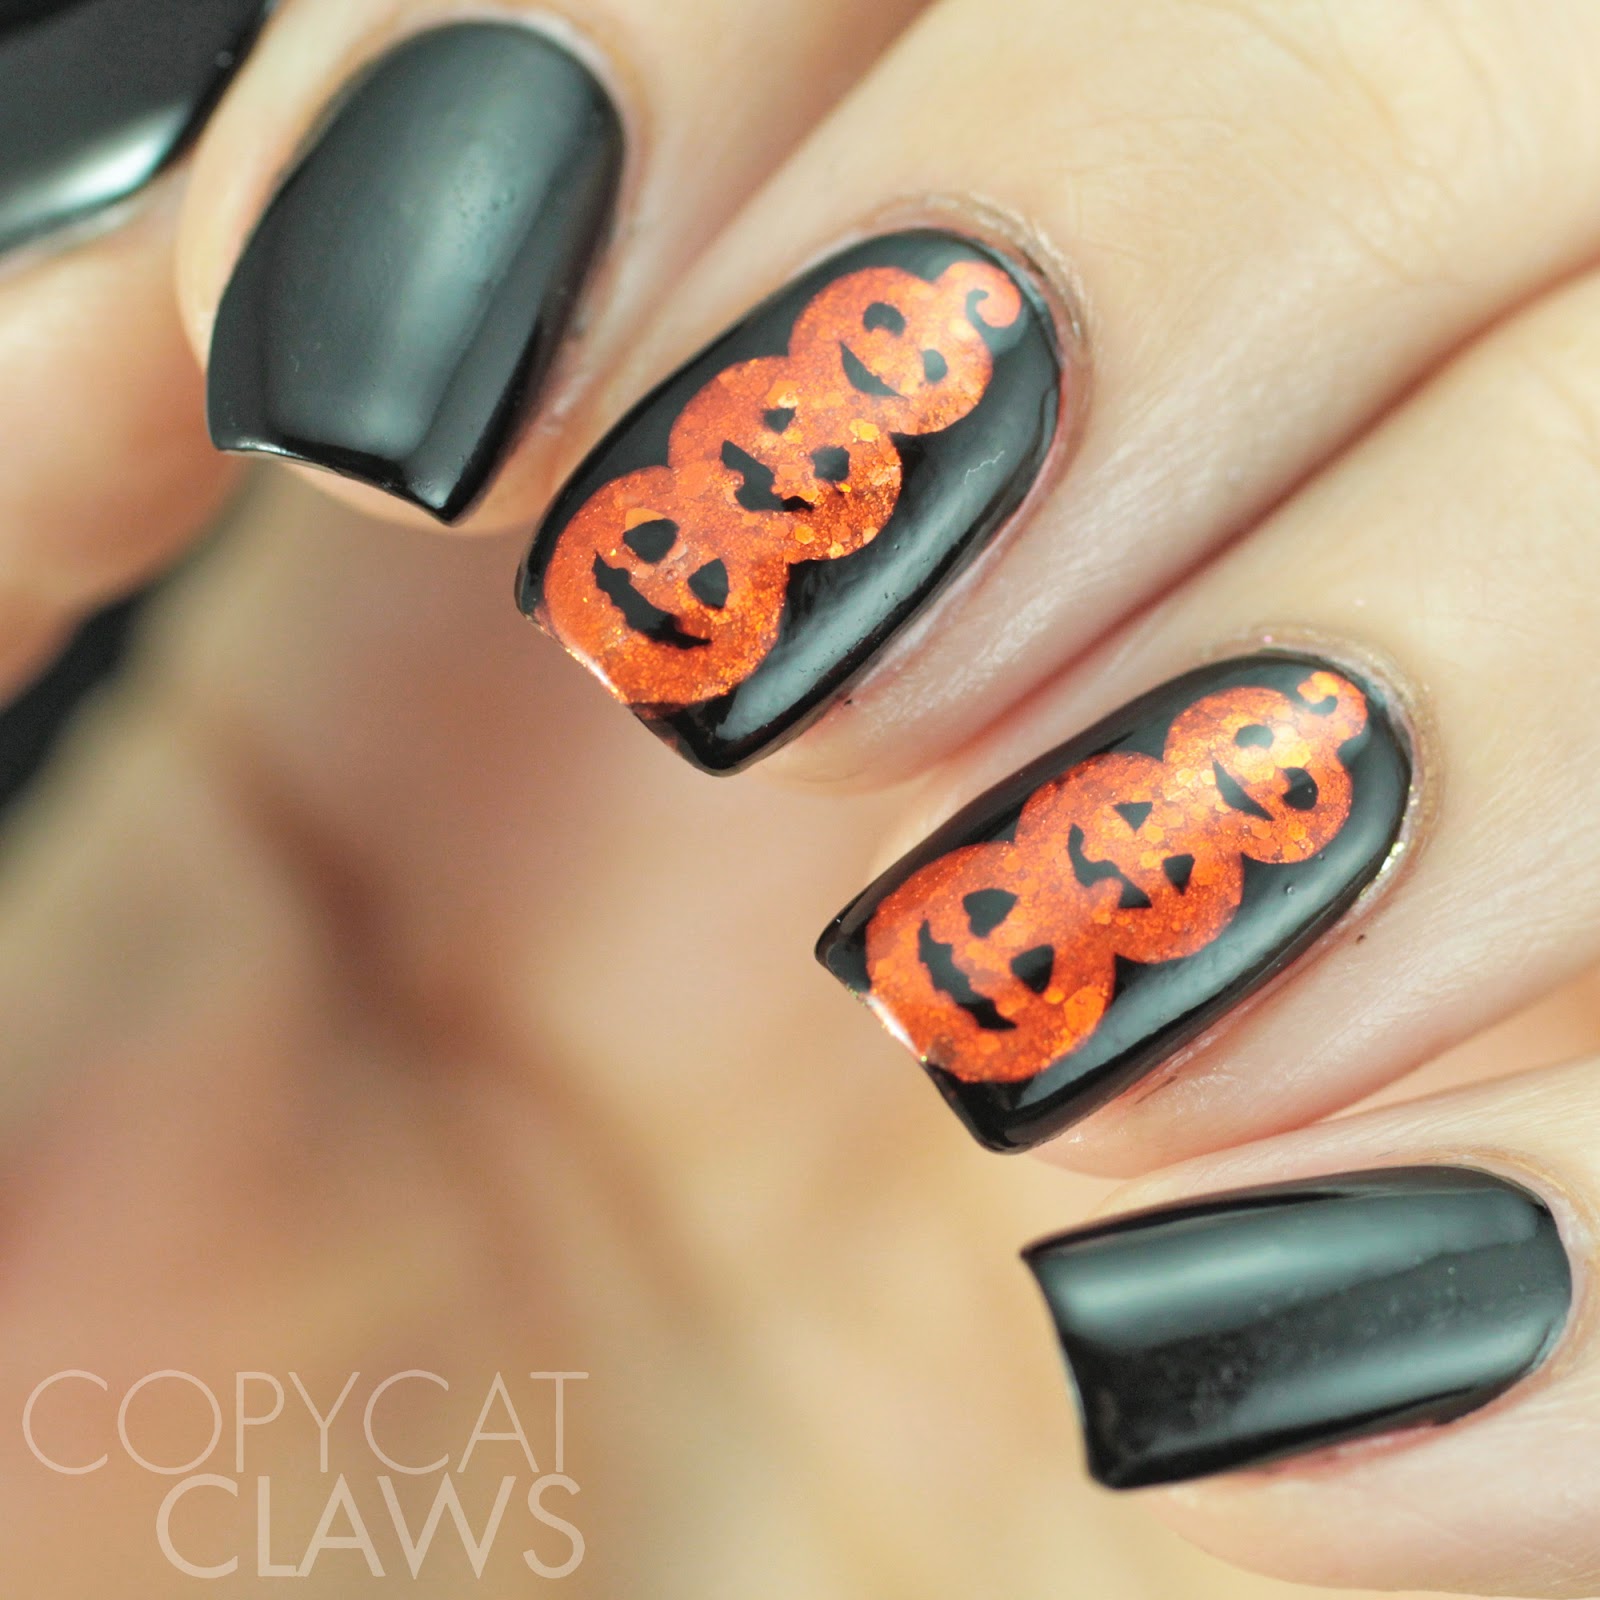 Copycat Claws: Whats Up Nails Halloween Nail Stencils